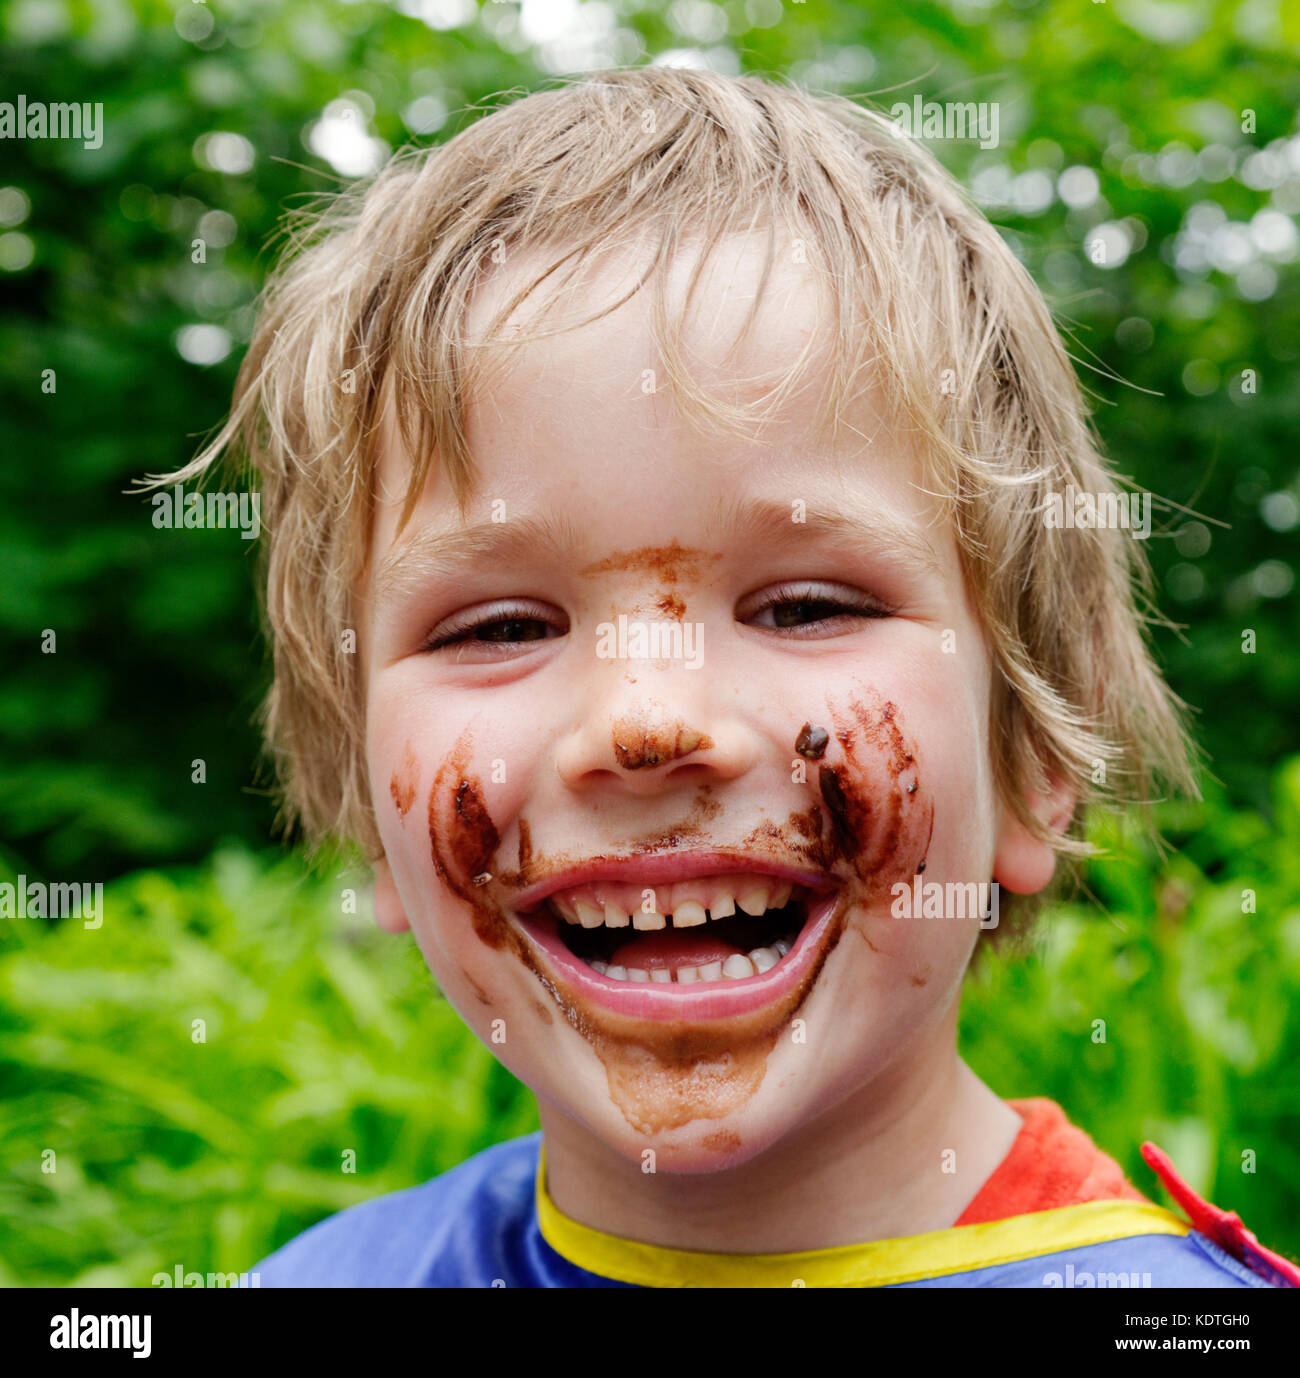 A little boy (5 yrs old) laughing with his face covered in chocolate after eating a chocolate ice cream Stock Photo